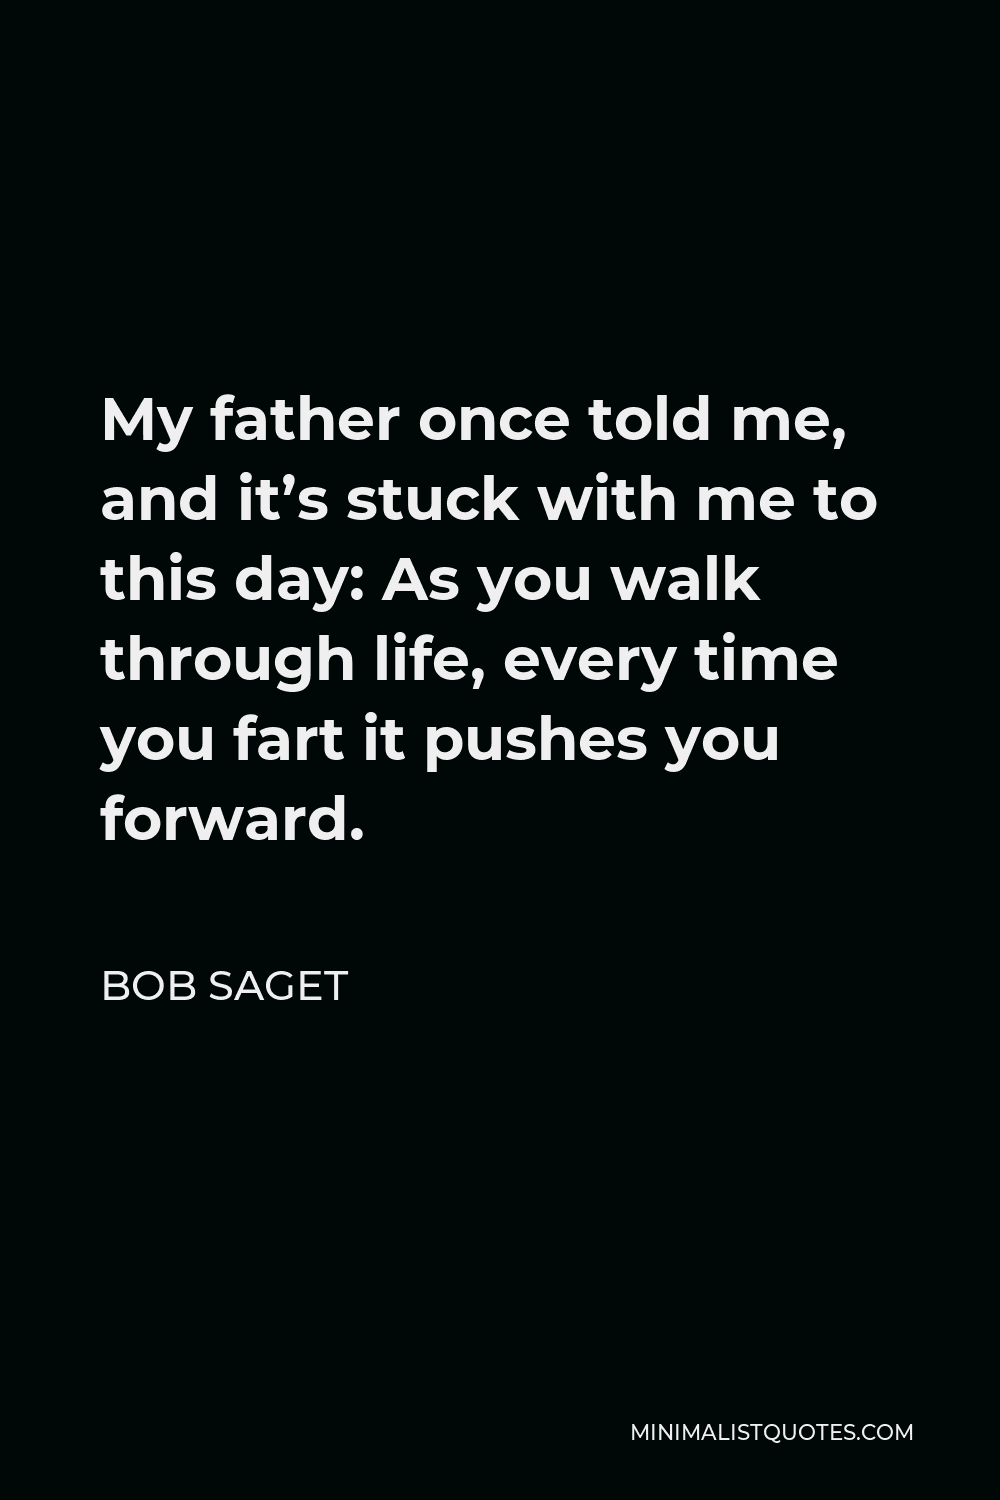 Bob Saget Quote - My father once told me, and it’s stuck with me to this day: As you walk through life, every time you fart it pushes you forward.